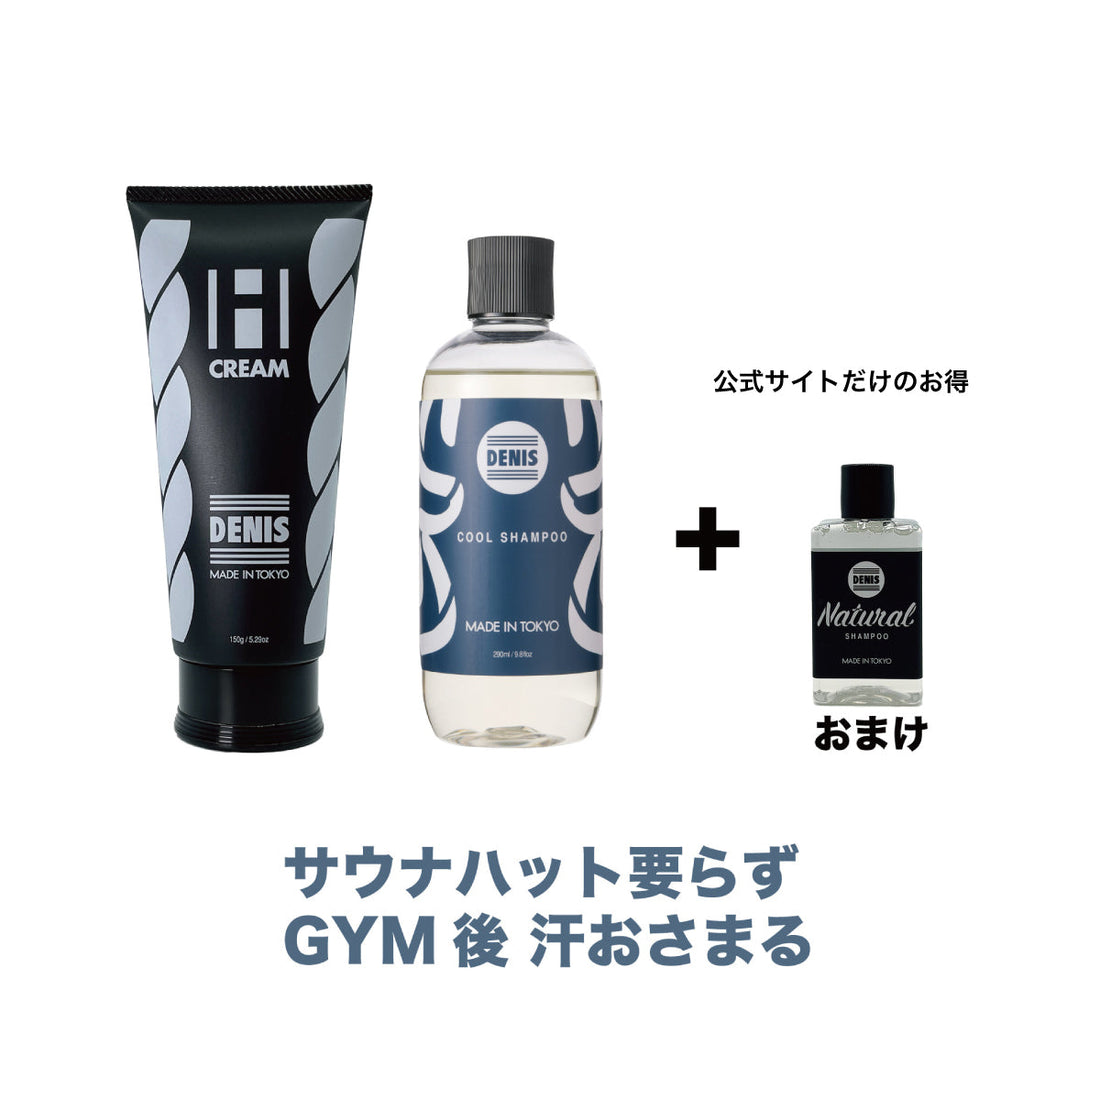 Recommended Set for Surf Gym Sauna [with benefits]